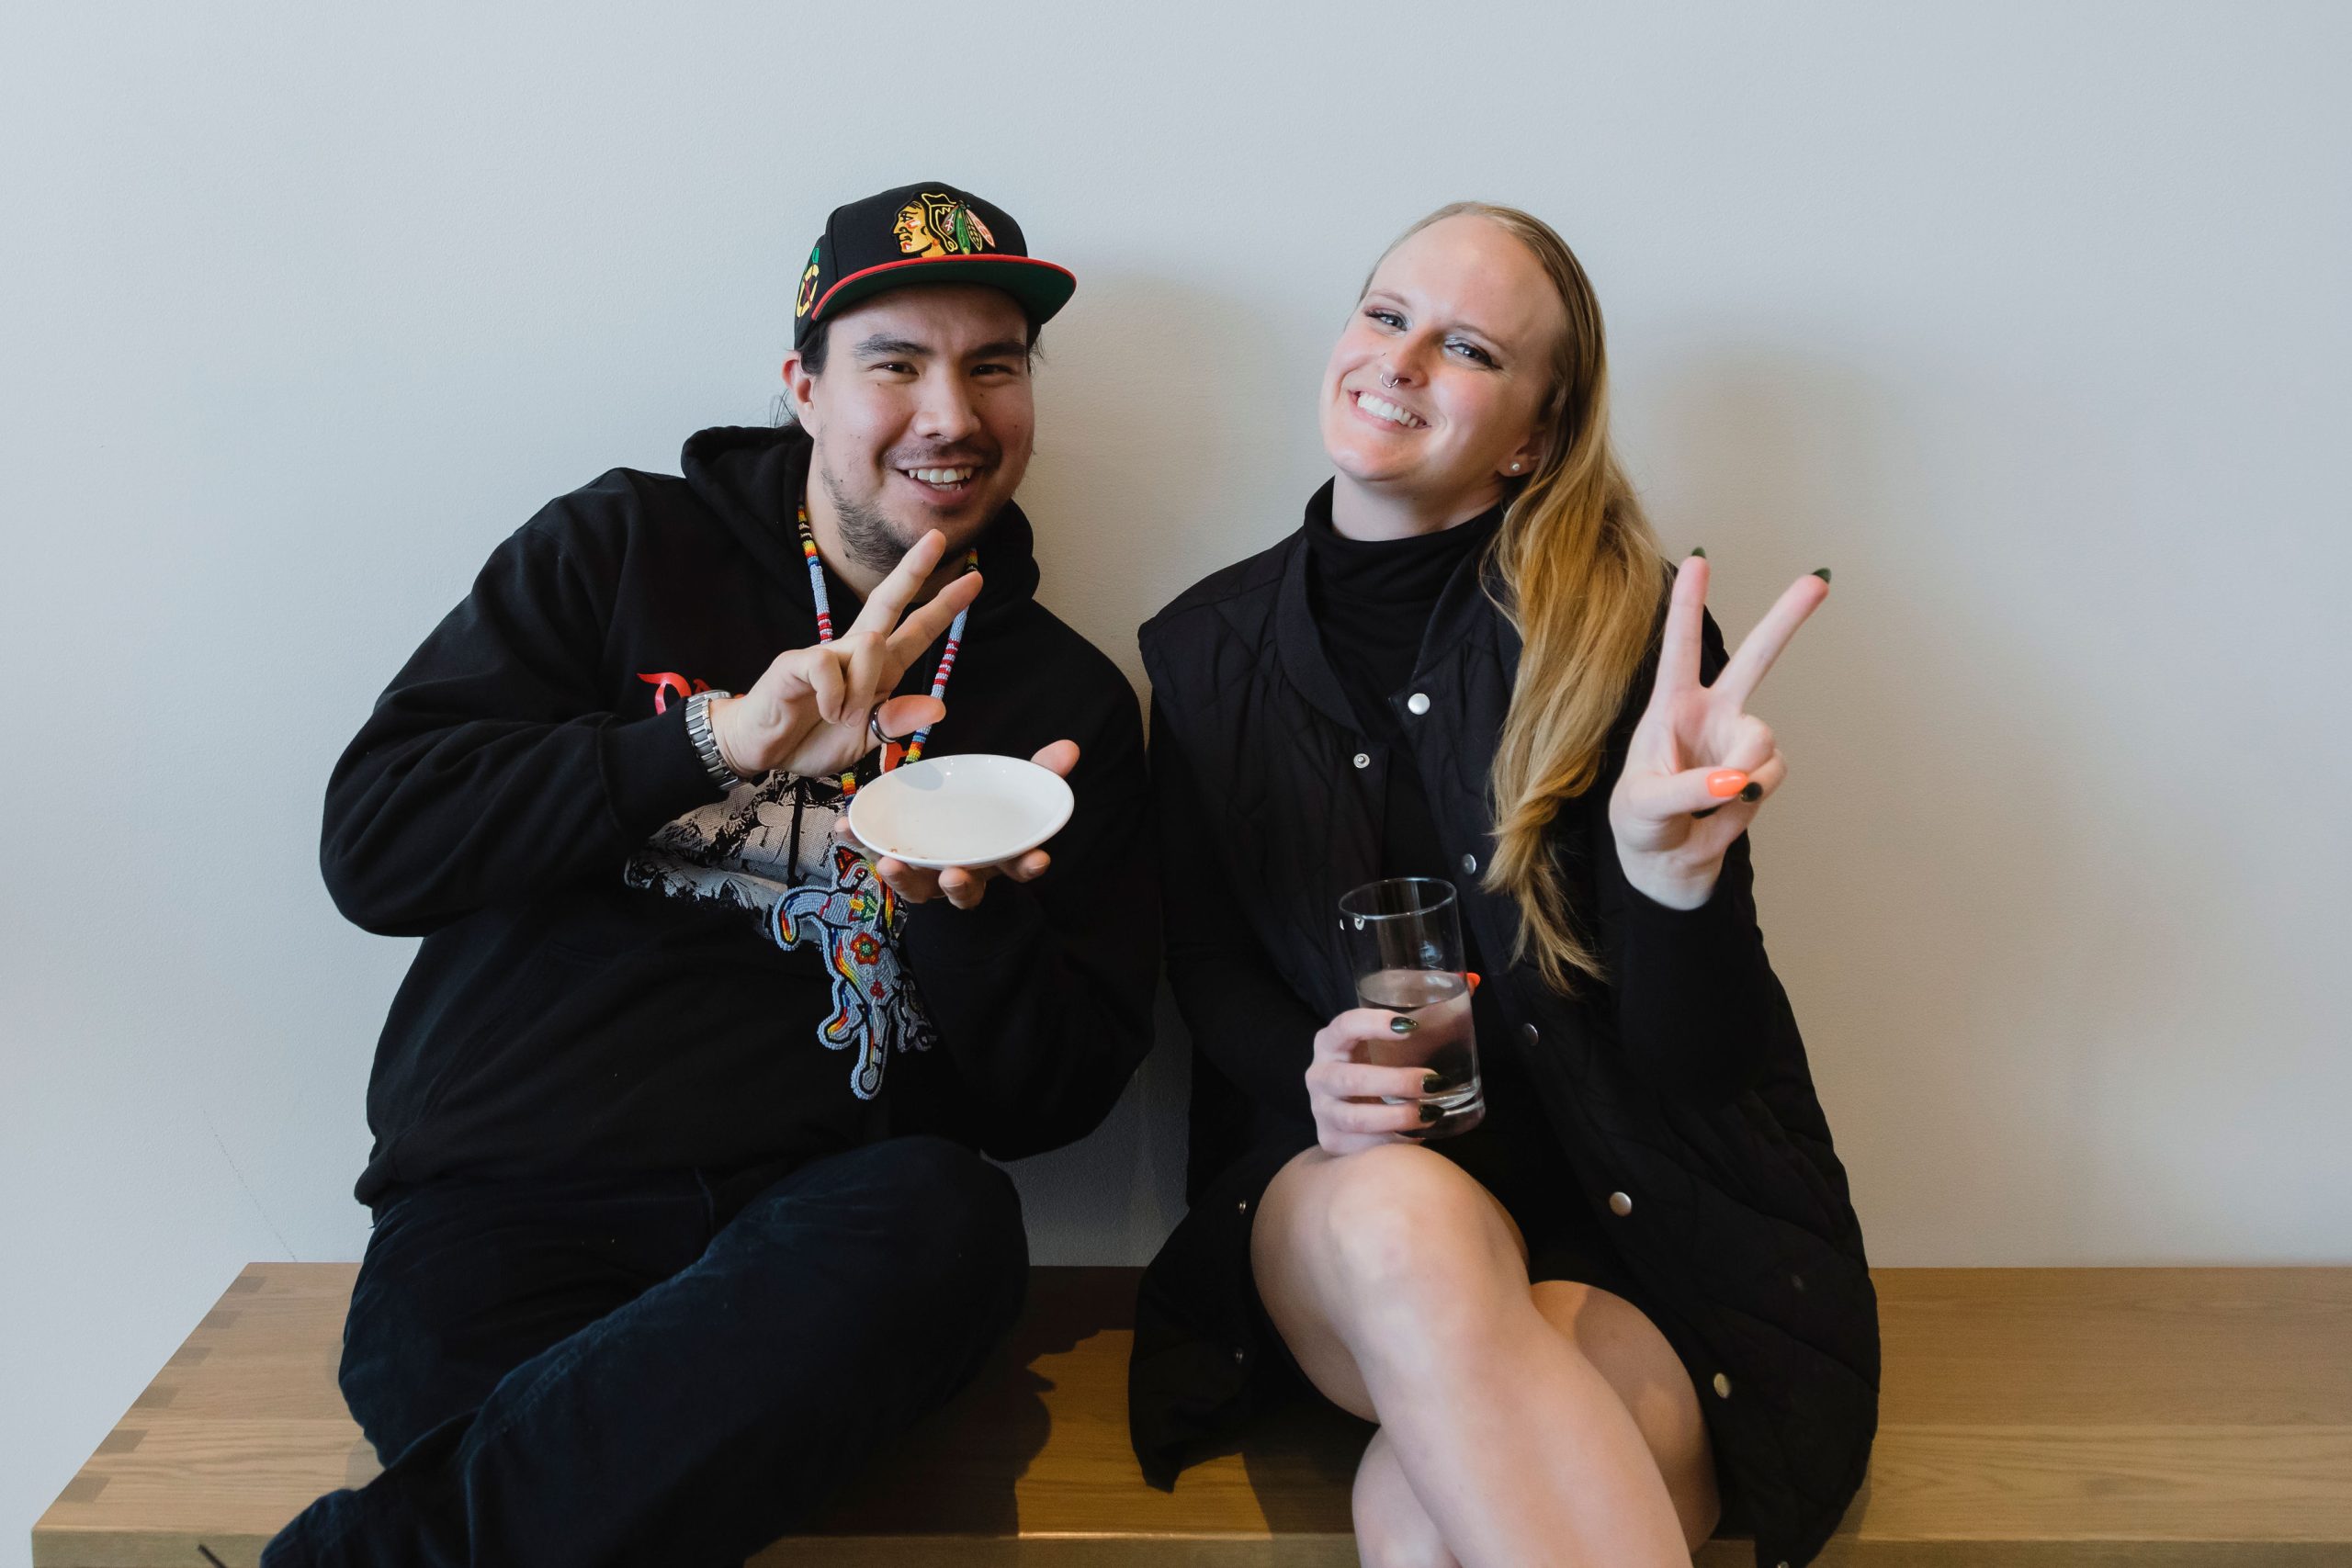 Two people sit on a bench together at Remai Modern, holding up peace signs to the camera.